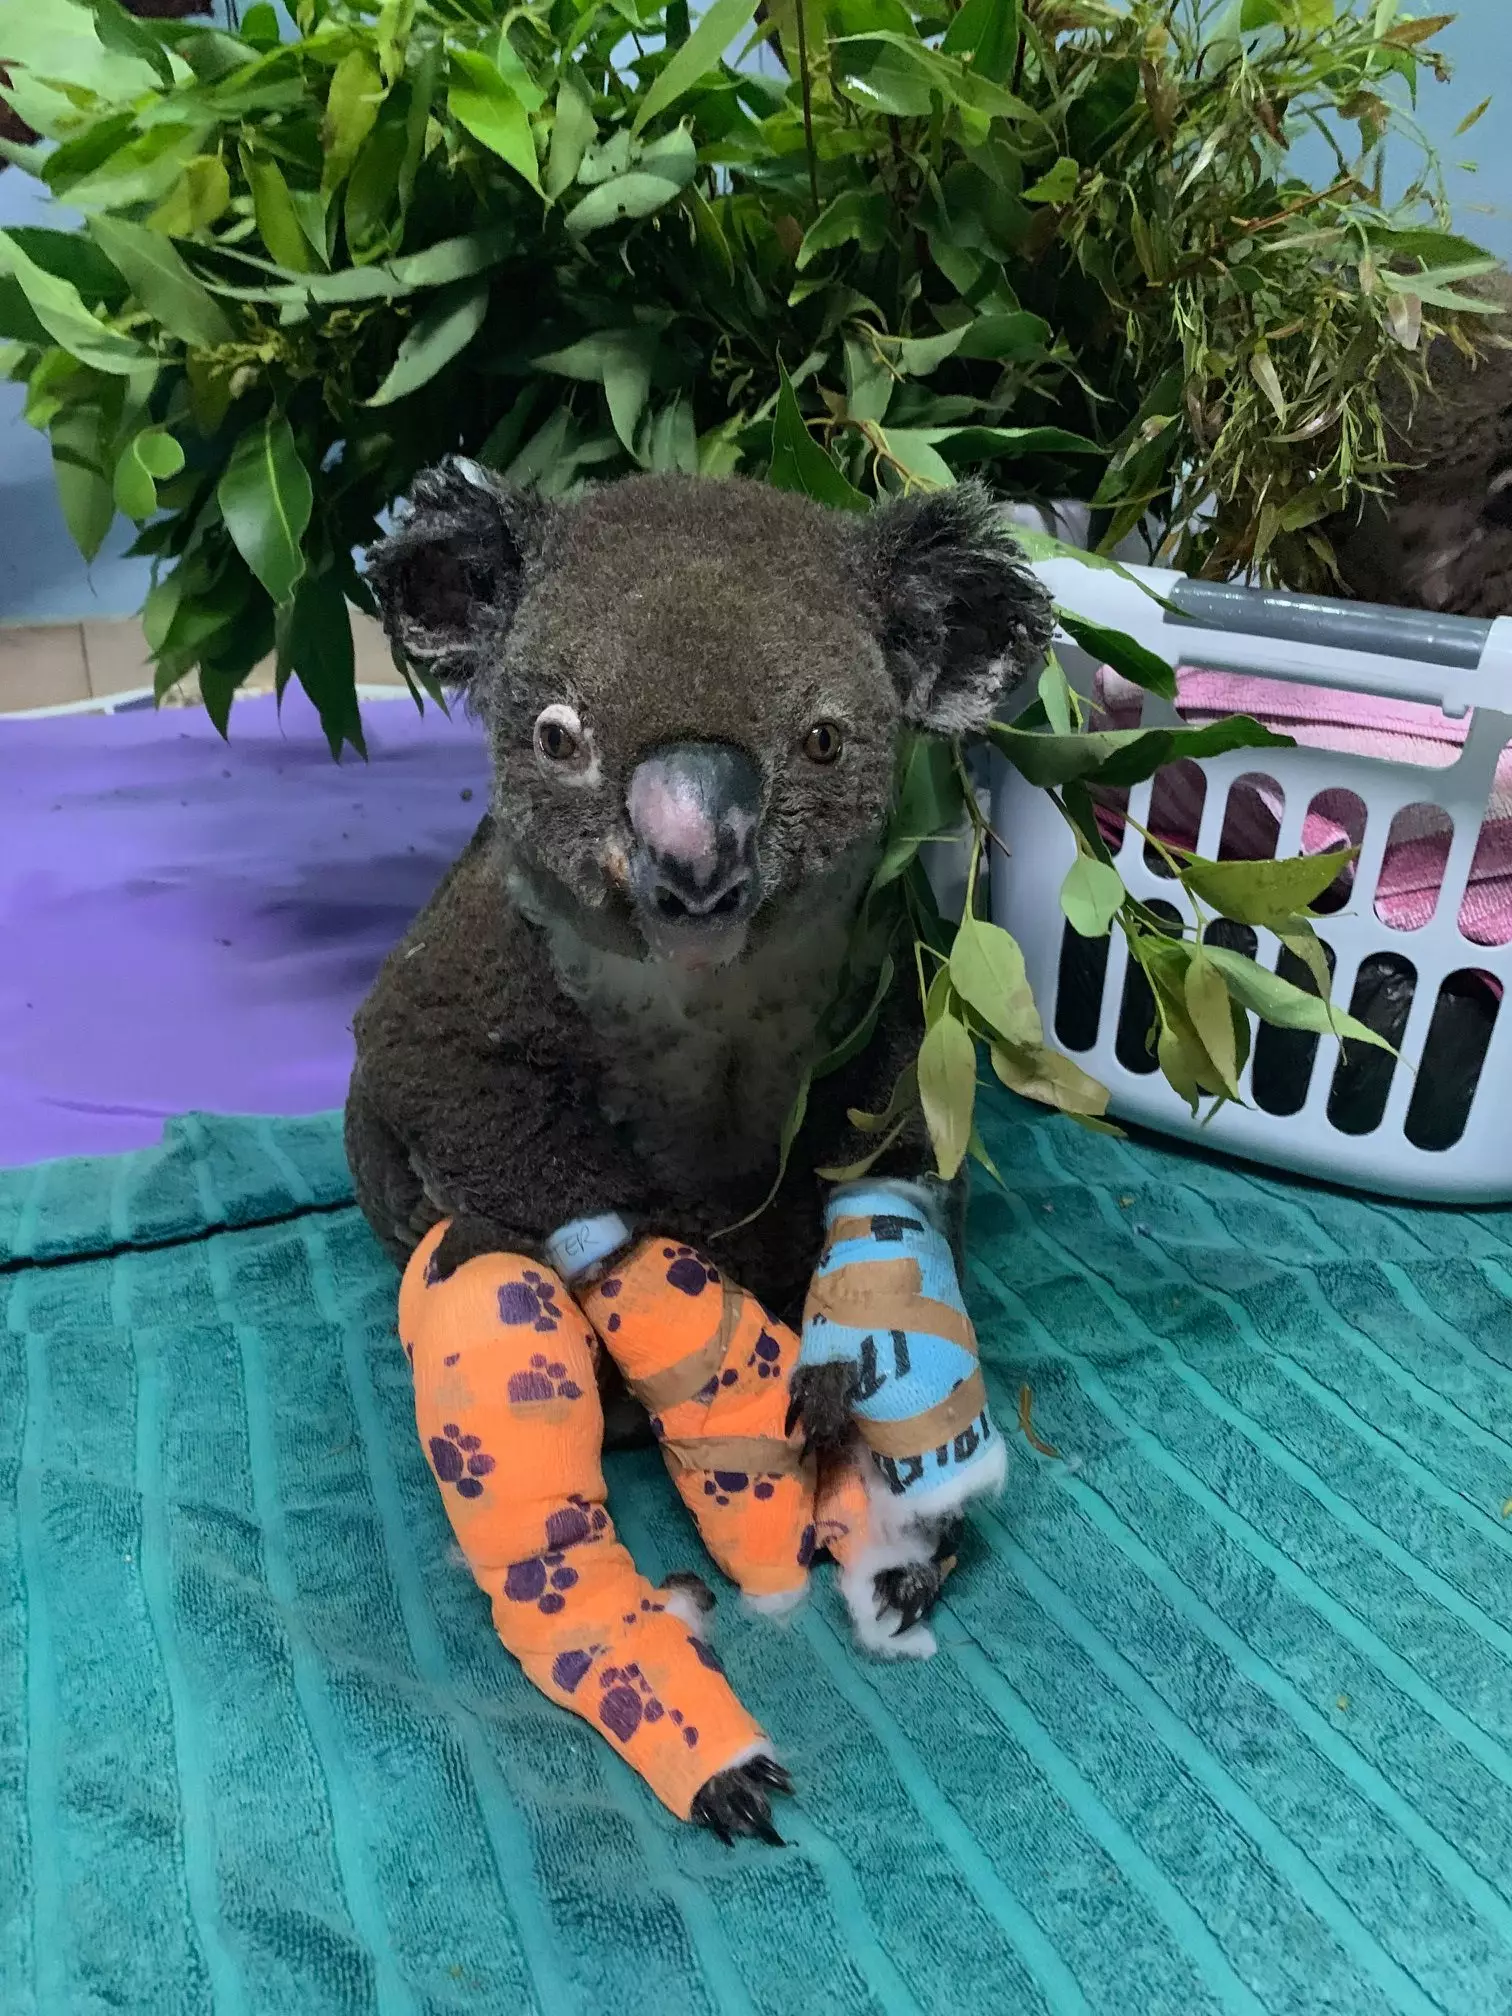 A picture of Peter the koala who has been badly burnt in the bushfire and now is being treated at a koala hospital.